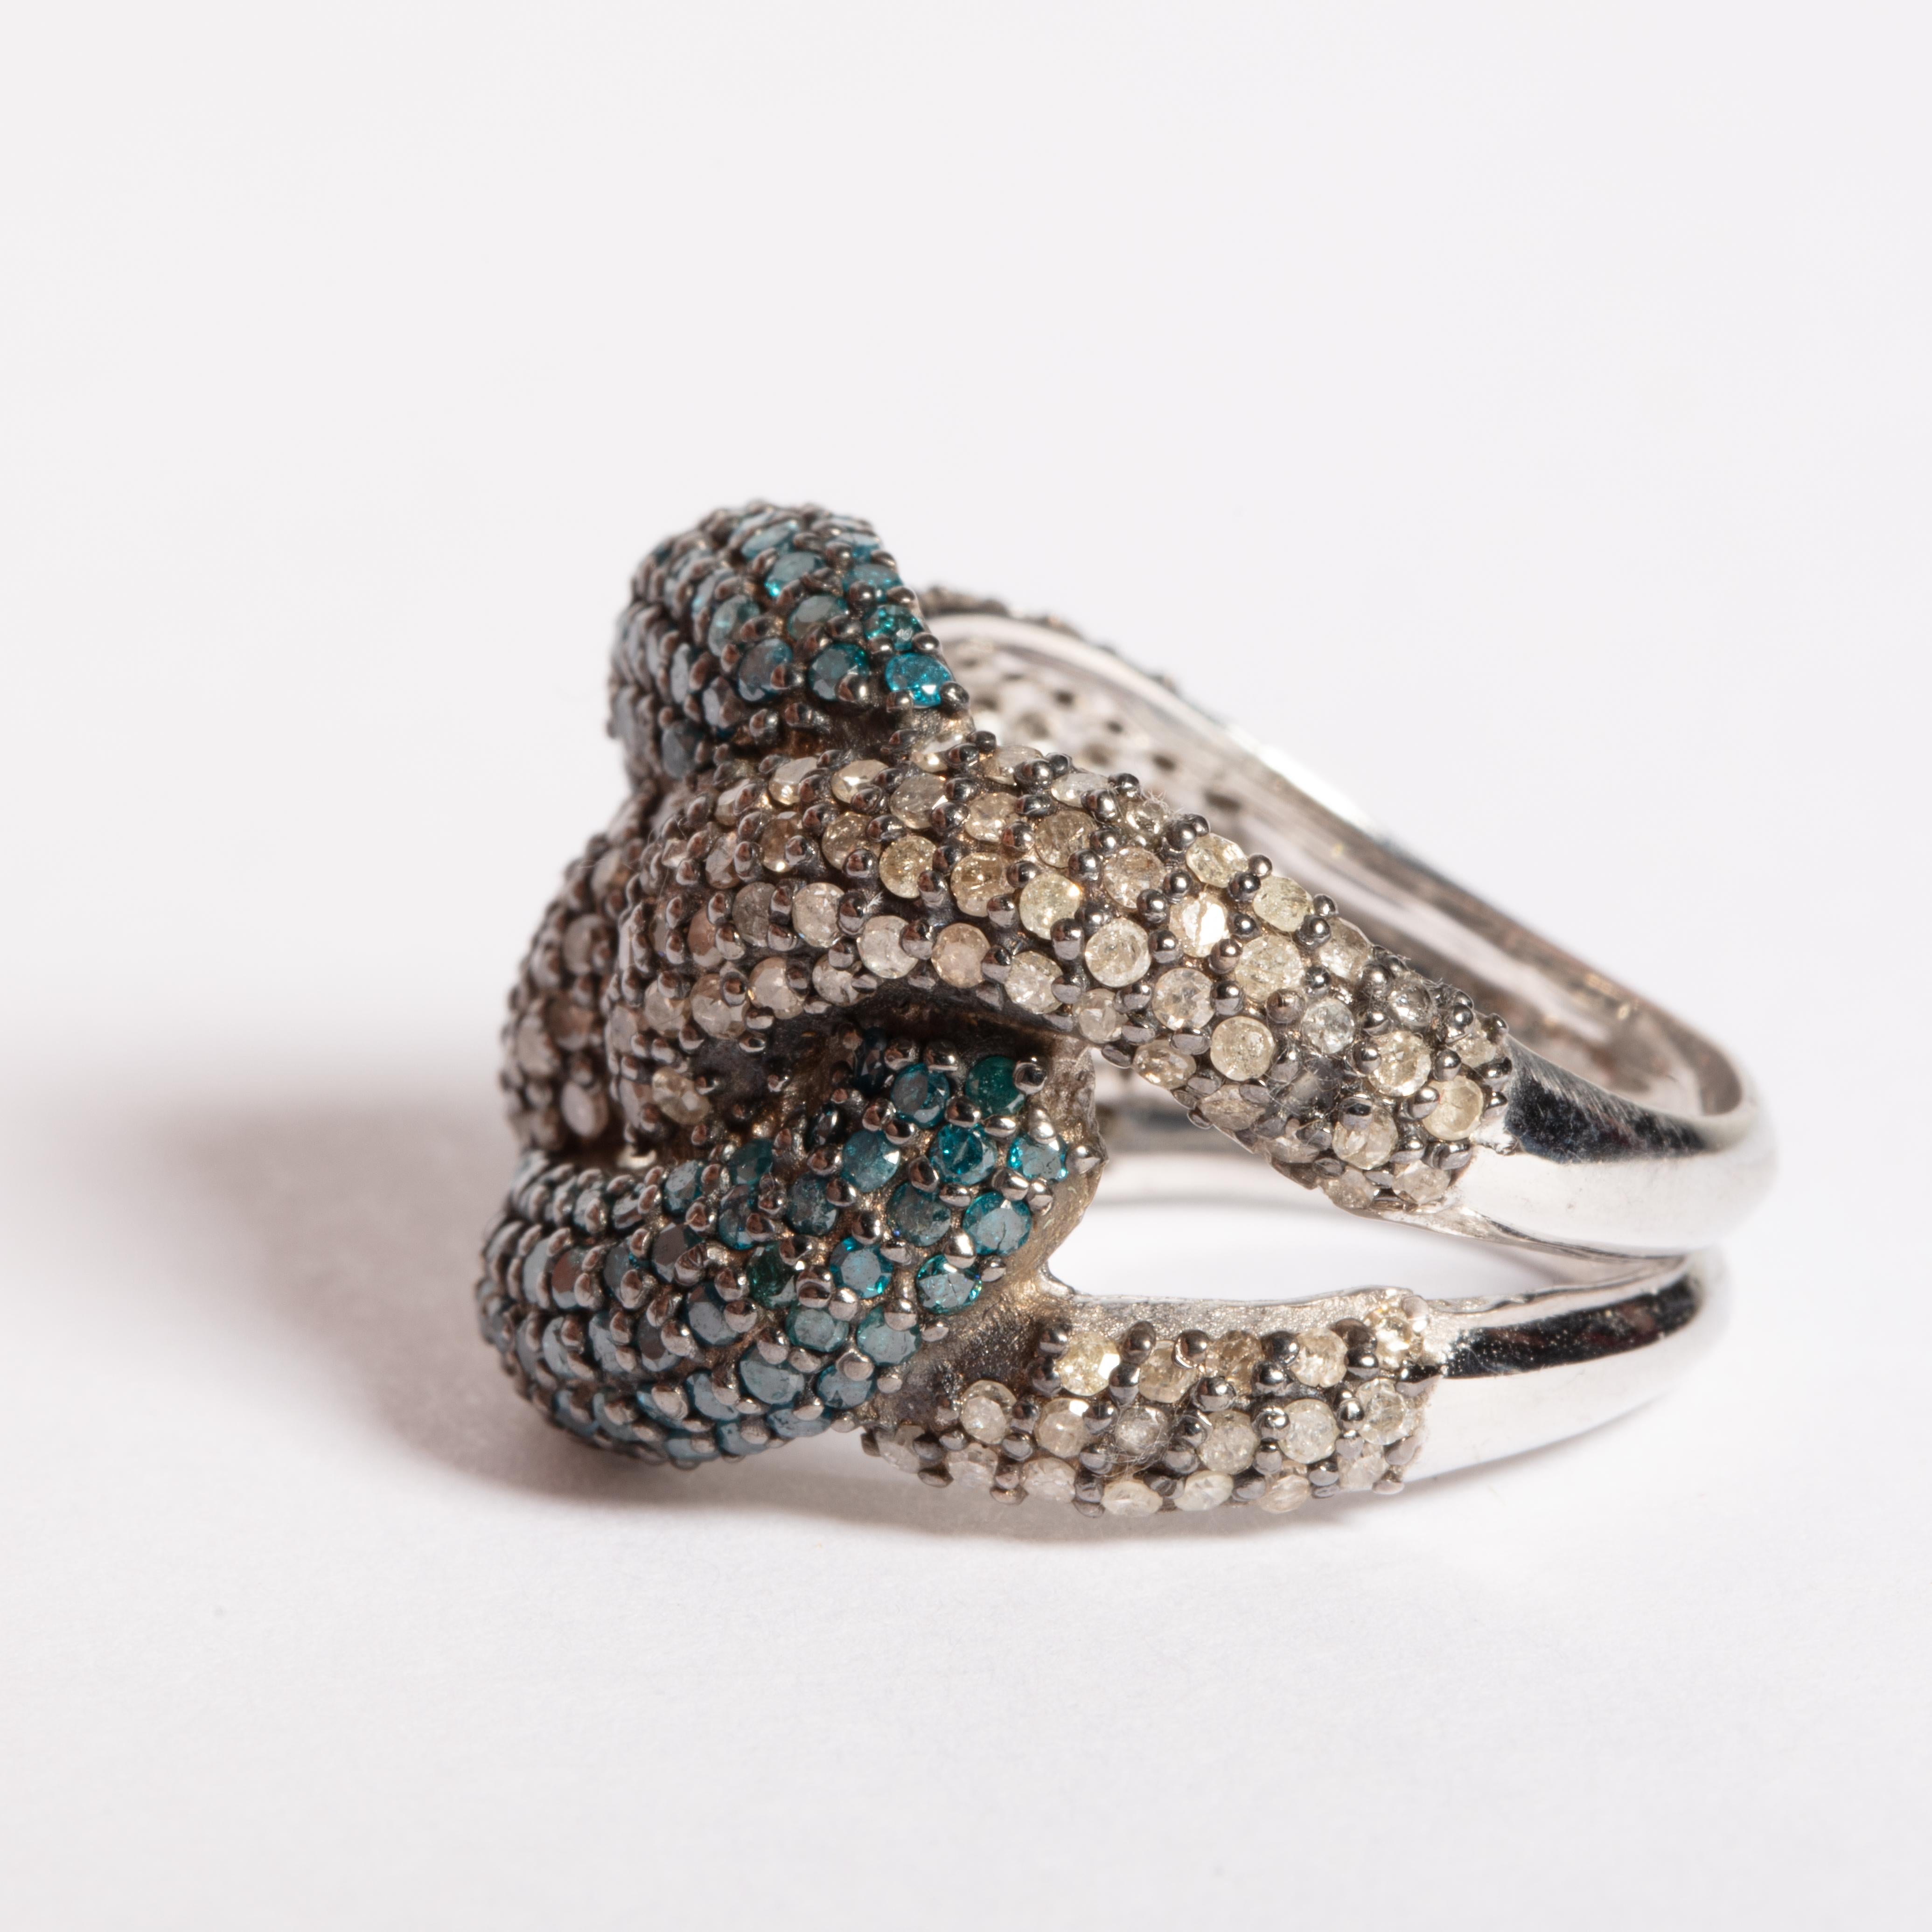 An unusual knot design of pave`-set diamonds and blue diamonds set in sterling silver.  Carat weight of diamonds is 2,25 and sapphires are 1.78 carats.  Ring size is 7.

The fine jewelry collection is sourced, designed or created by Deborah Lockhart